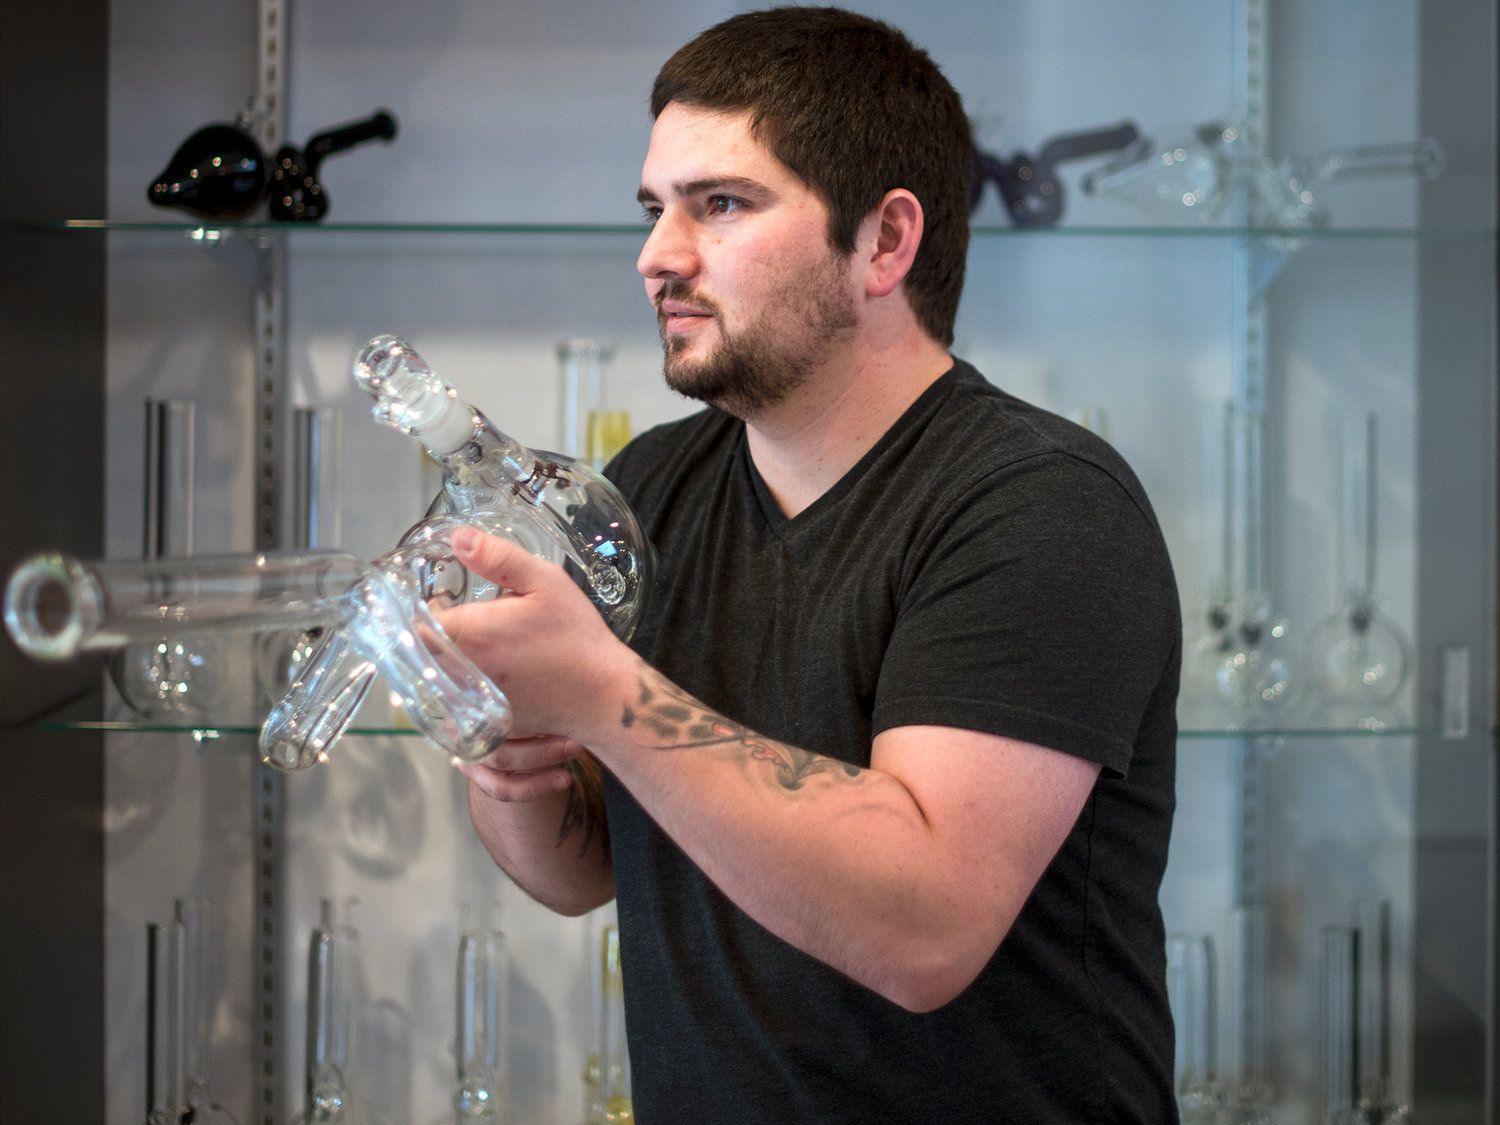 Peter Jacobsen, part-owner of The Jackal, shows off an expensive glass bong that is in the shape of a gun on Tuesday, Nov. 24, at their downtown Chehalis shop.